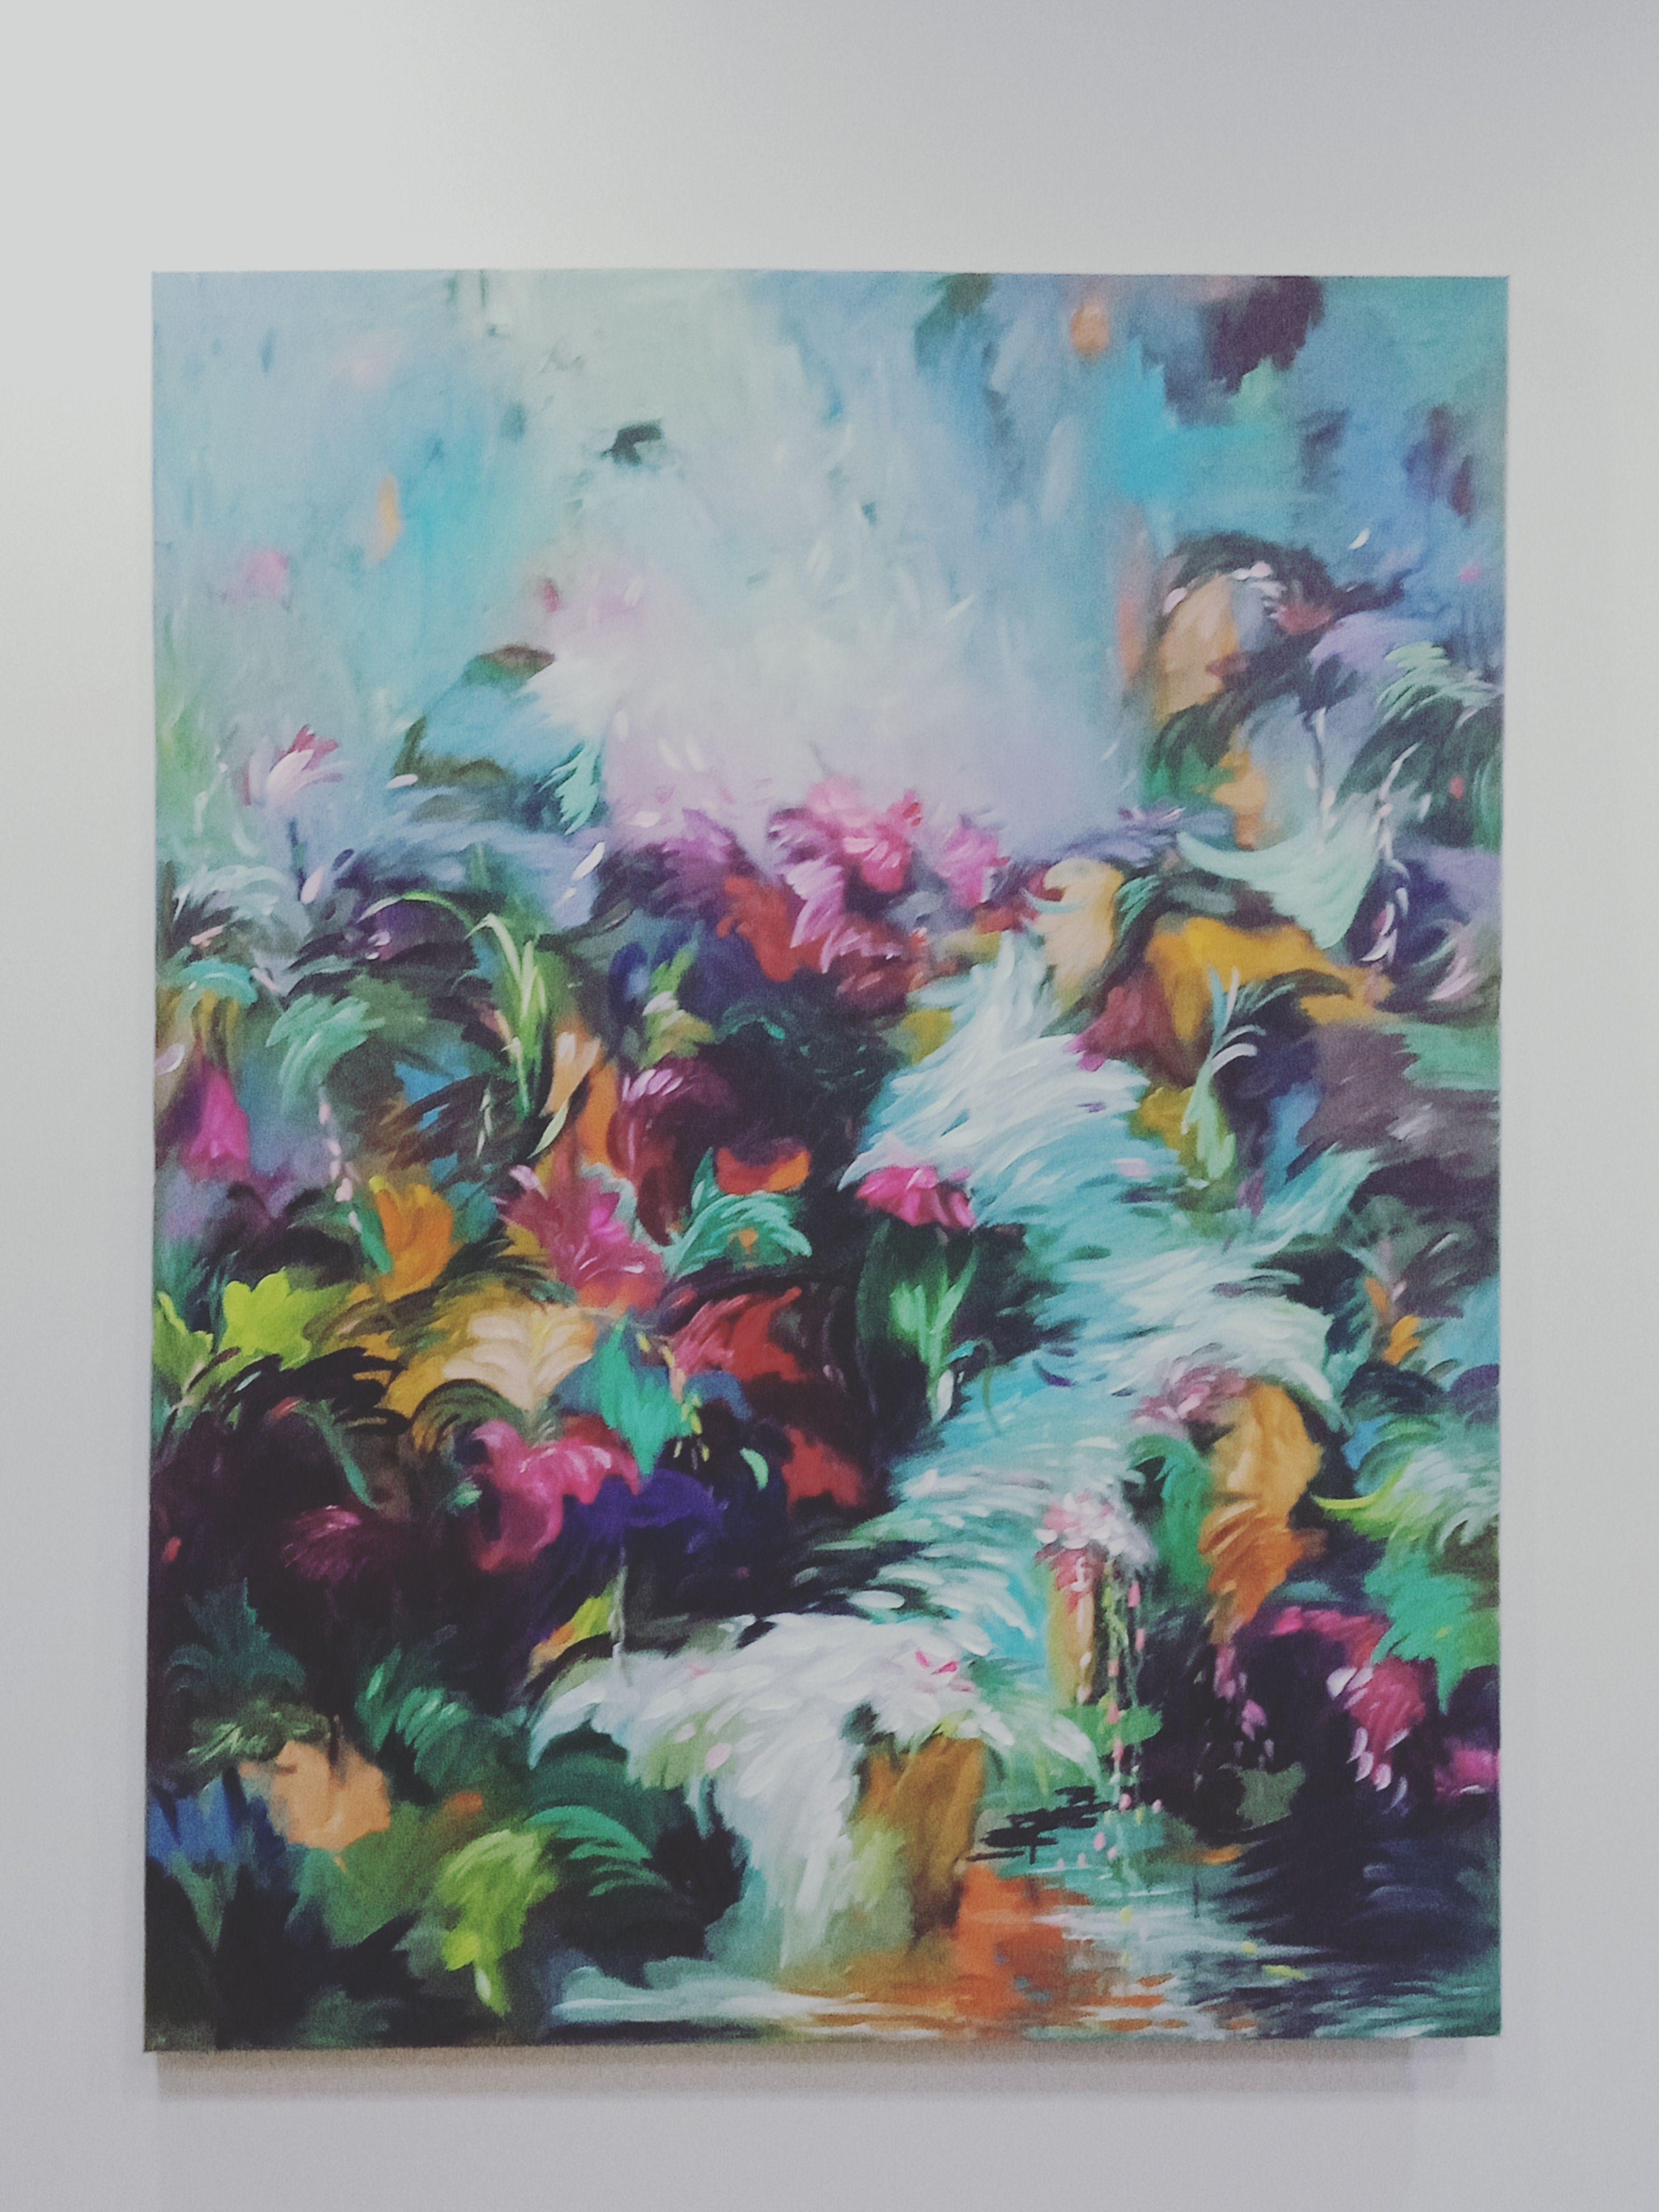 Imprint of Spring is an original large-format painting of 115-150 cm created by the artist inspired by beautiful nature with the hope of bringing the best luck and happiness to everyone in the new year 2022 with the concept of good health and